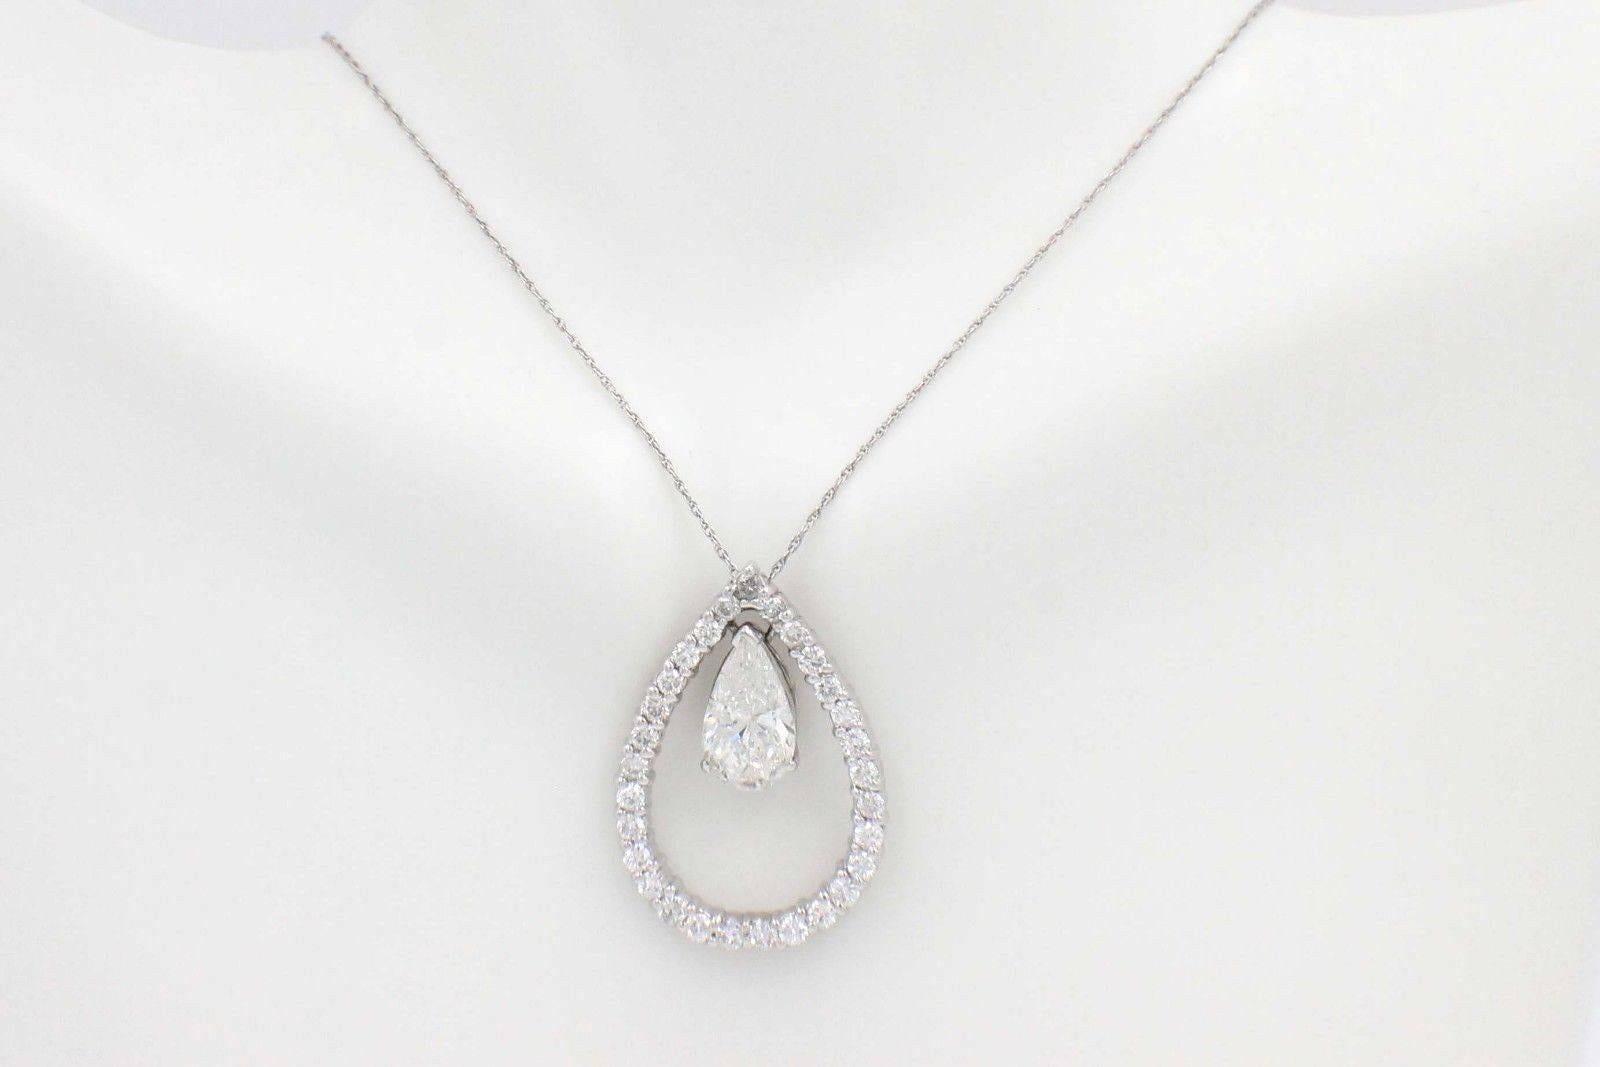 PEAR SHAPE DIAMOND & ROUND DIAMONDS PENDANT NECKLACE
Metal:  14KT White Gold
Size:  1.25 X 0.75 Inches
Length:  16 Inches
Total Carat Weight:  3.88 TCW
Diamond Shape:  Pear Shape 2.43 CTS
Diamond Color & Clarity:  H / I1
Accent Diamonds:  29 Round